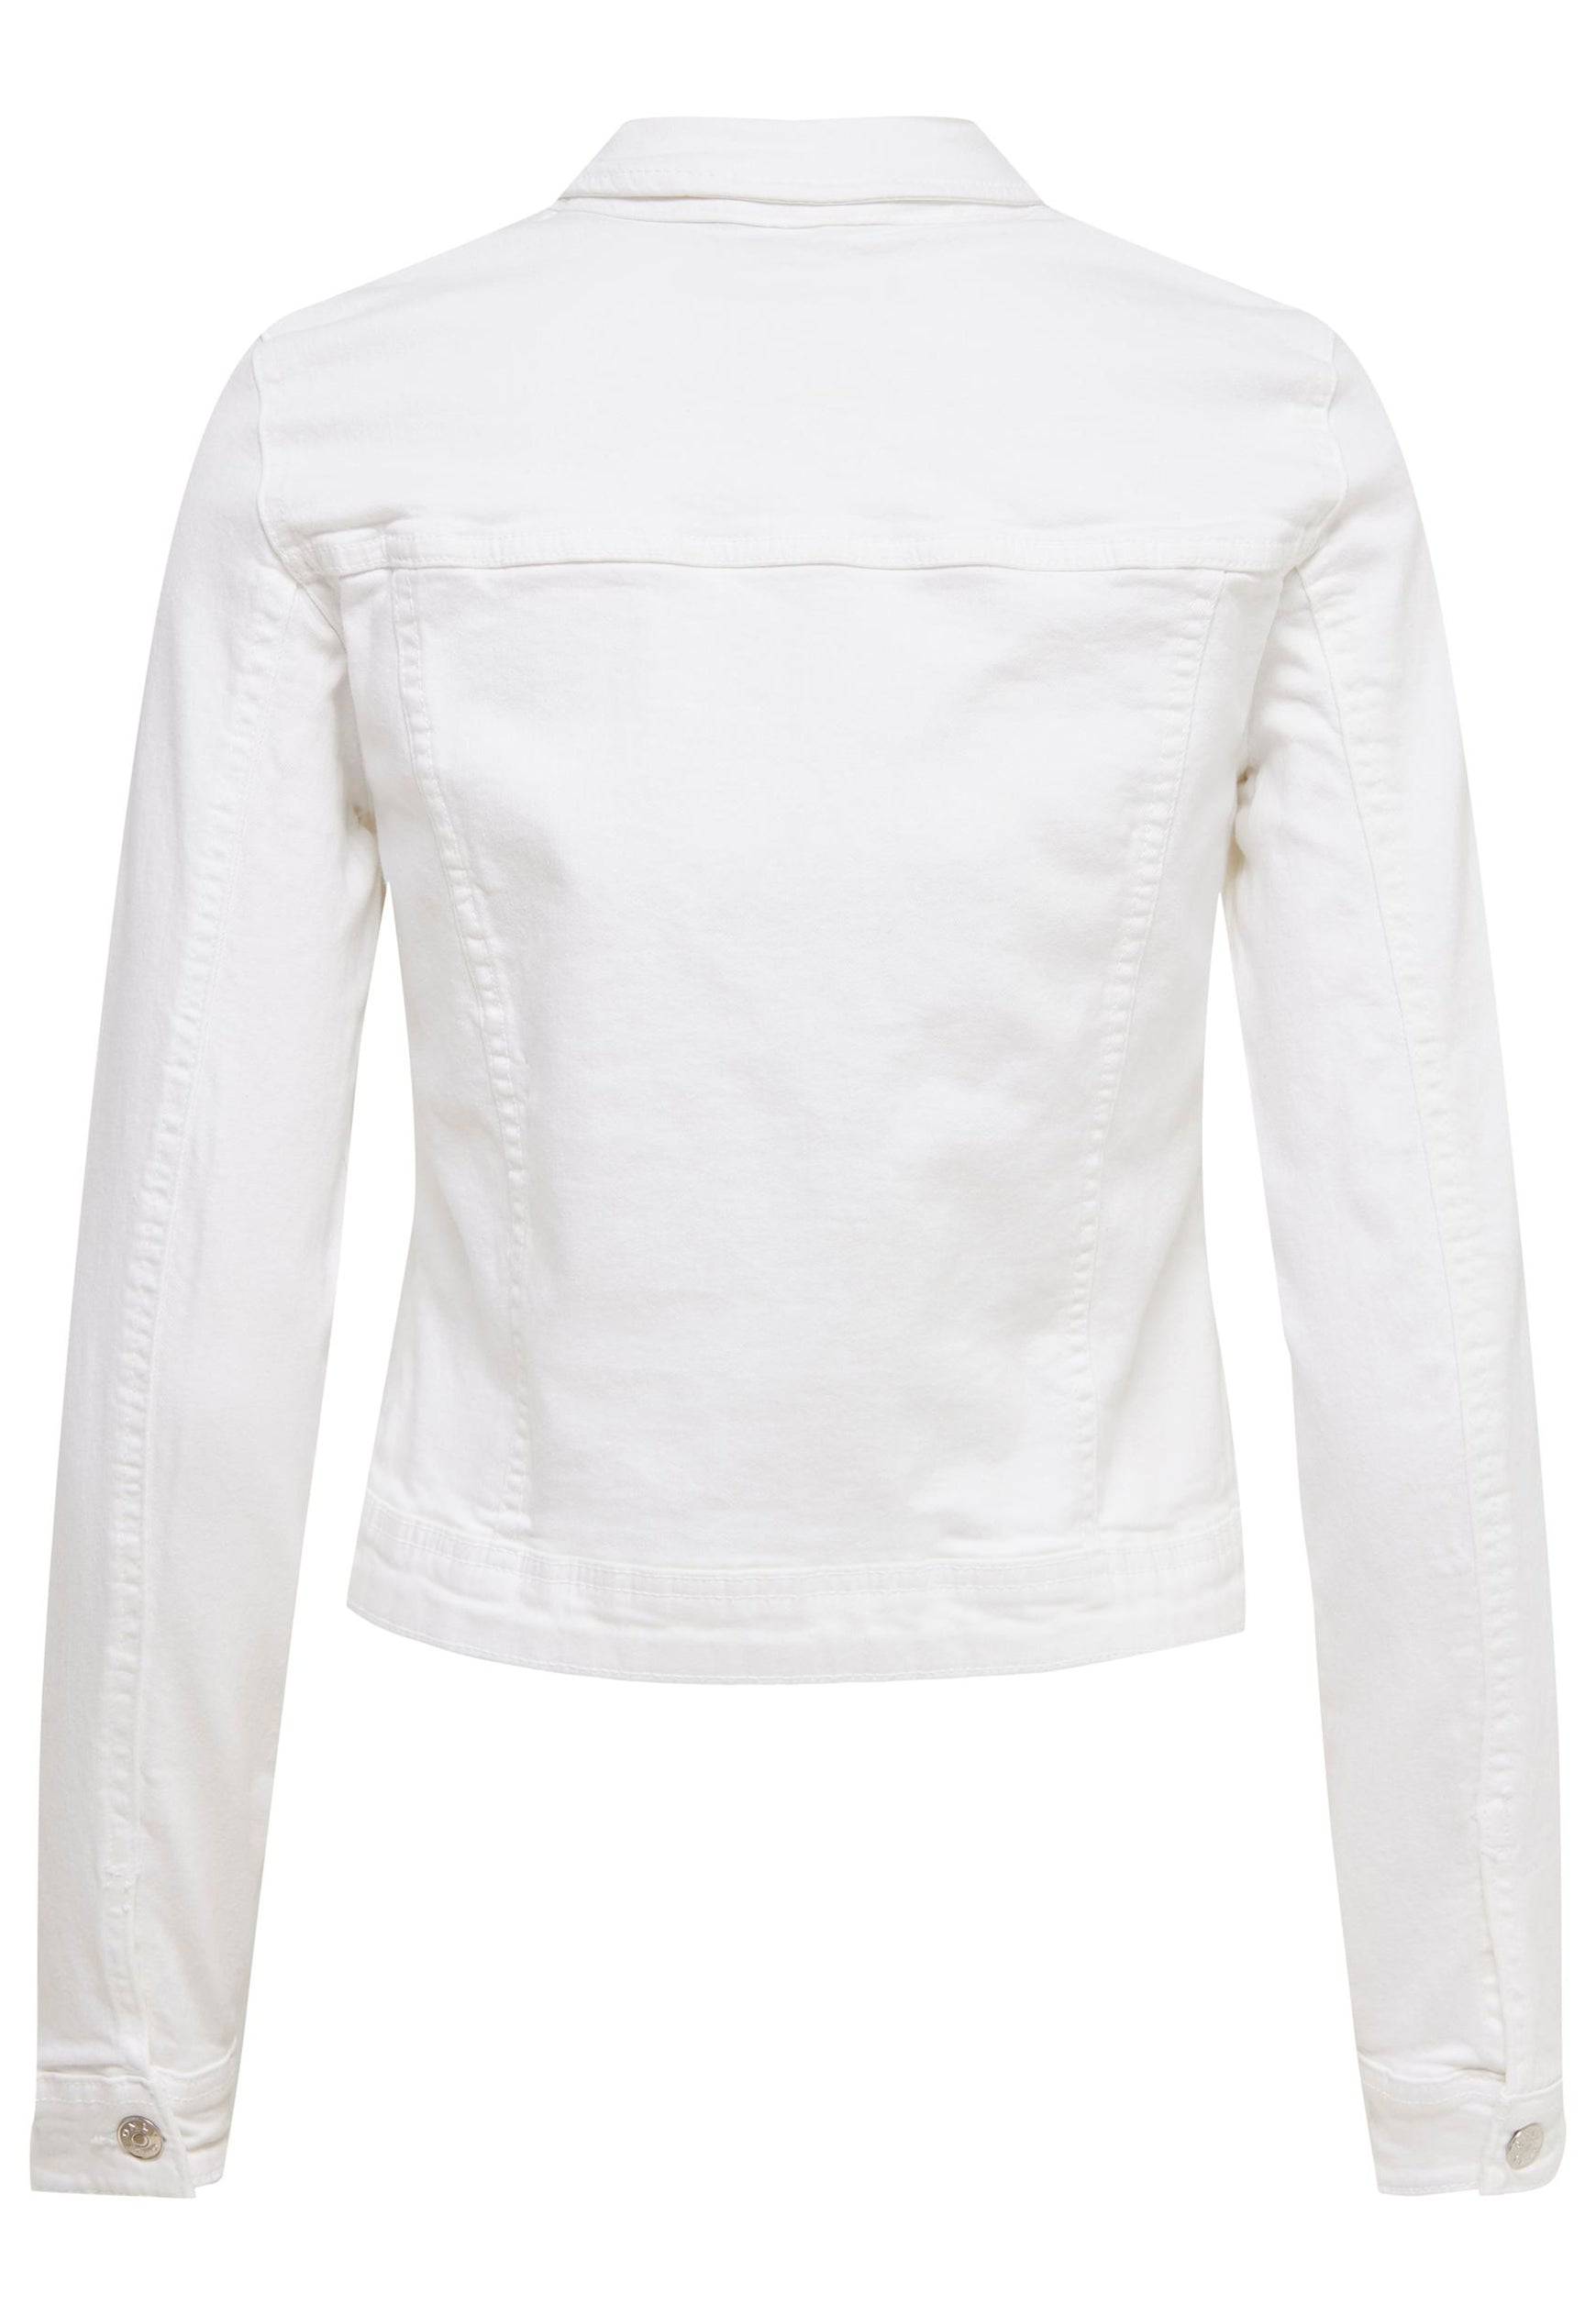 ONLY Tia Classic Denim Jacket in White | One Nation Clothing ONLY ...